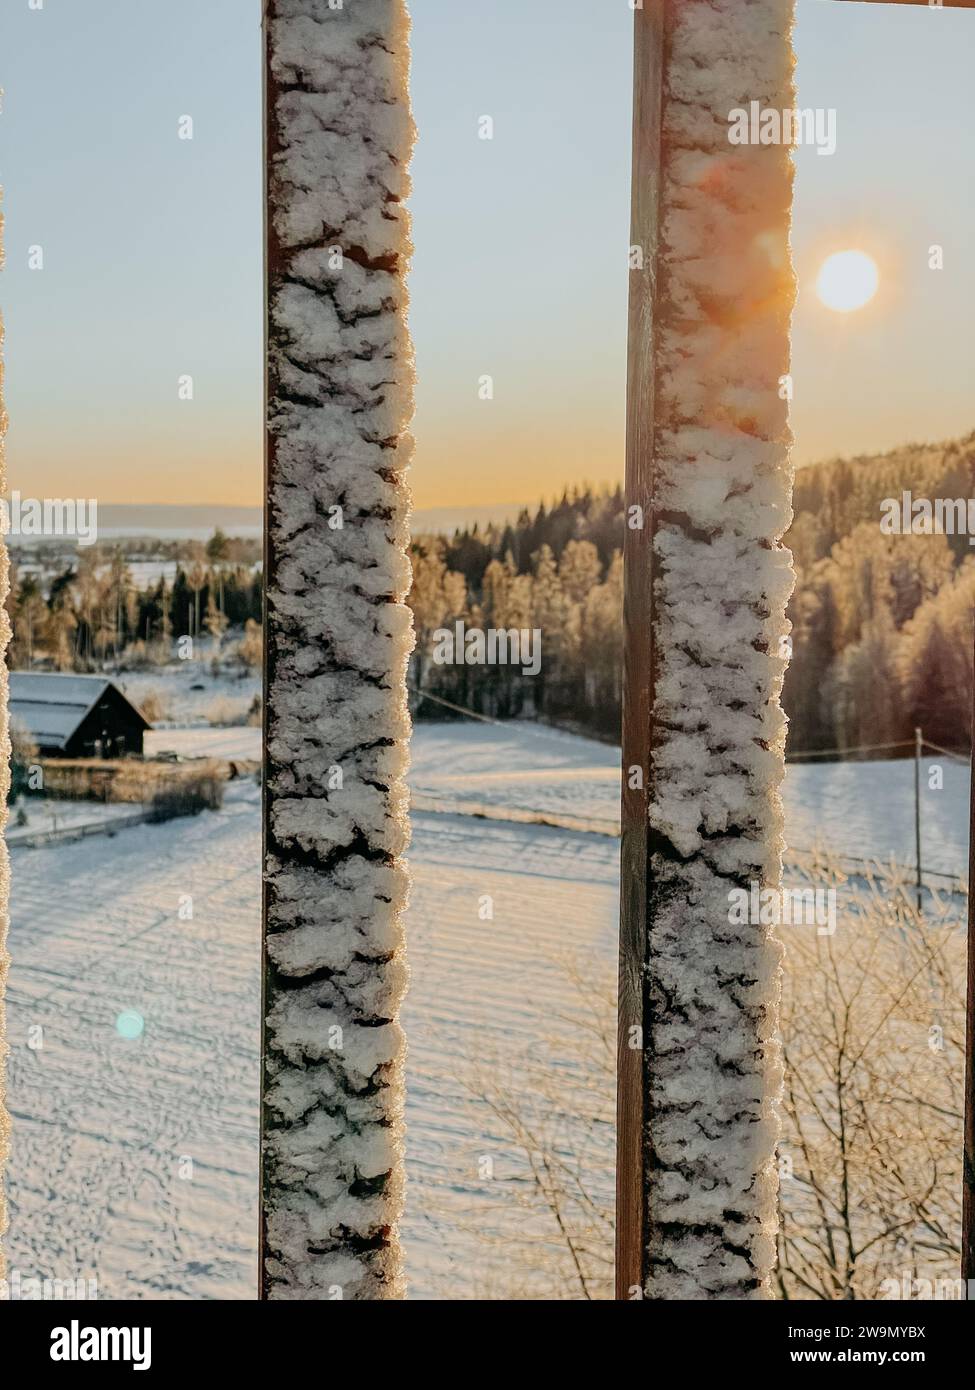 View of winter landscape through a snowy fence, Baerum, Akershus, Norway Stock Photo